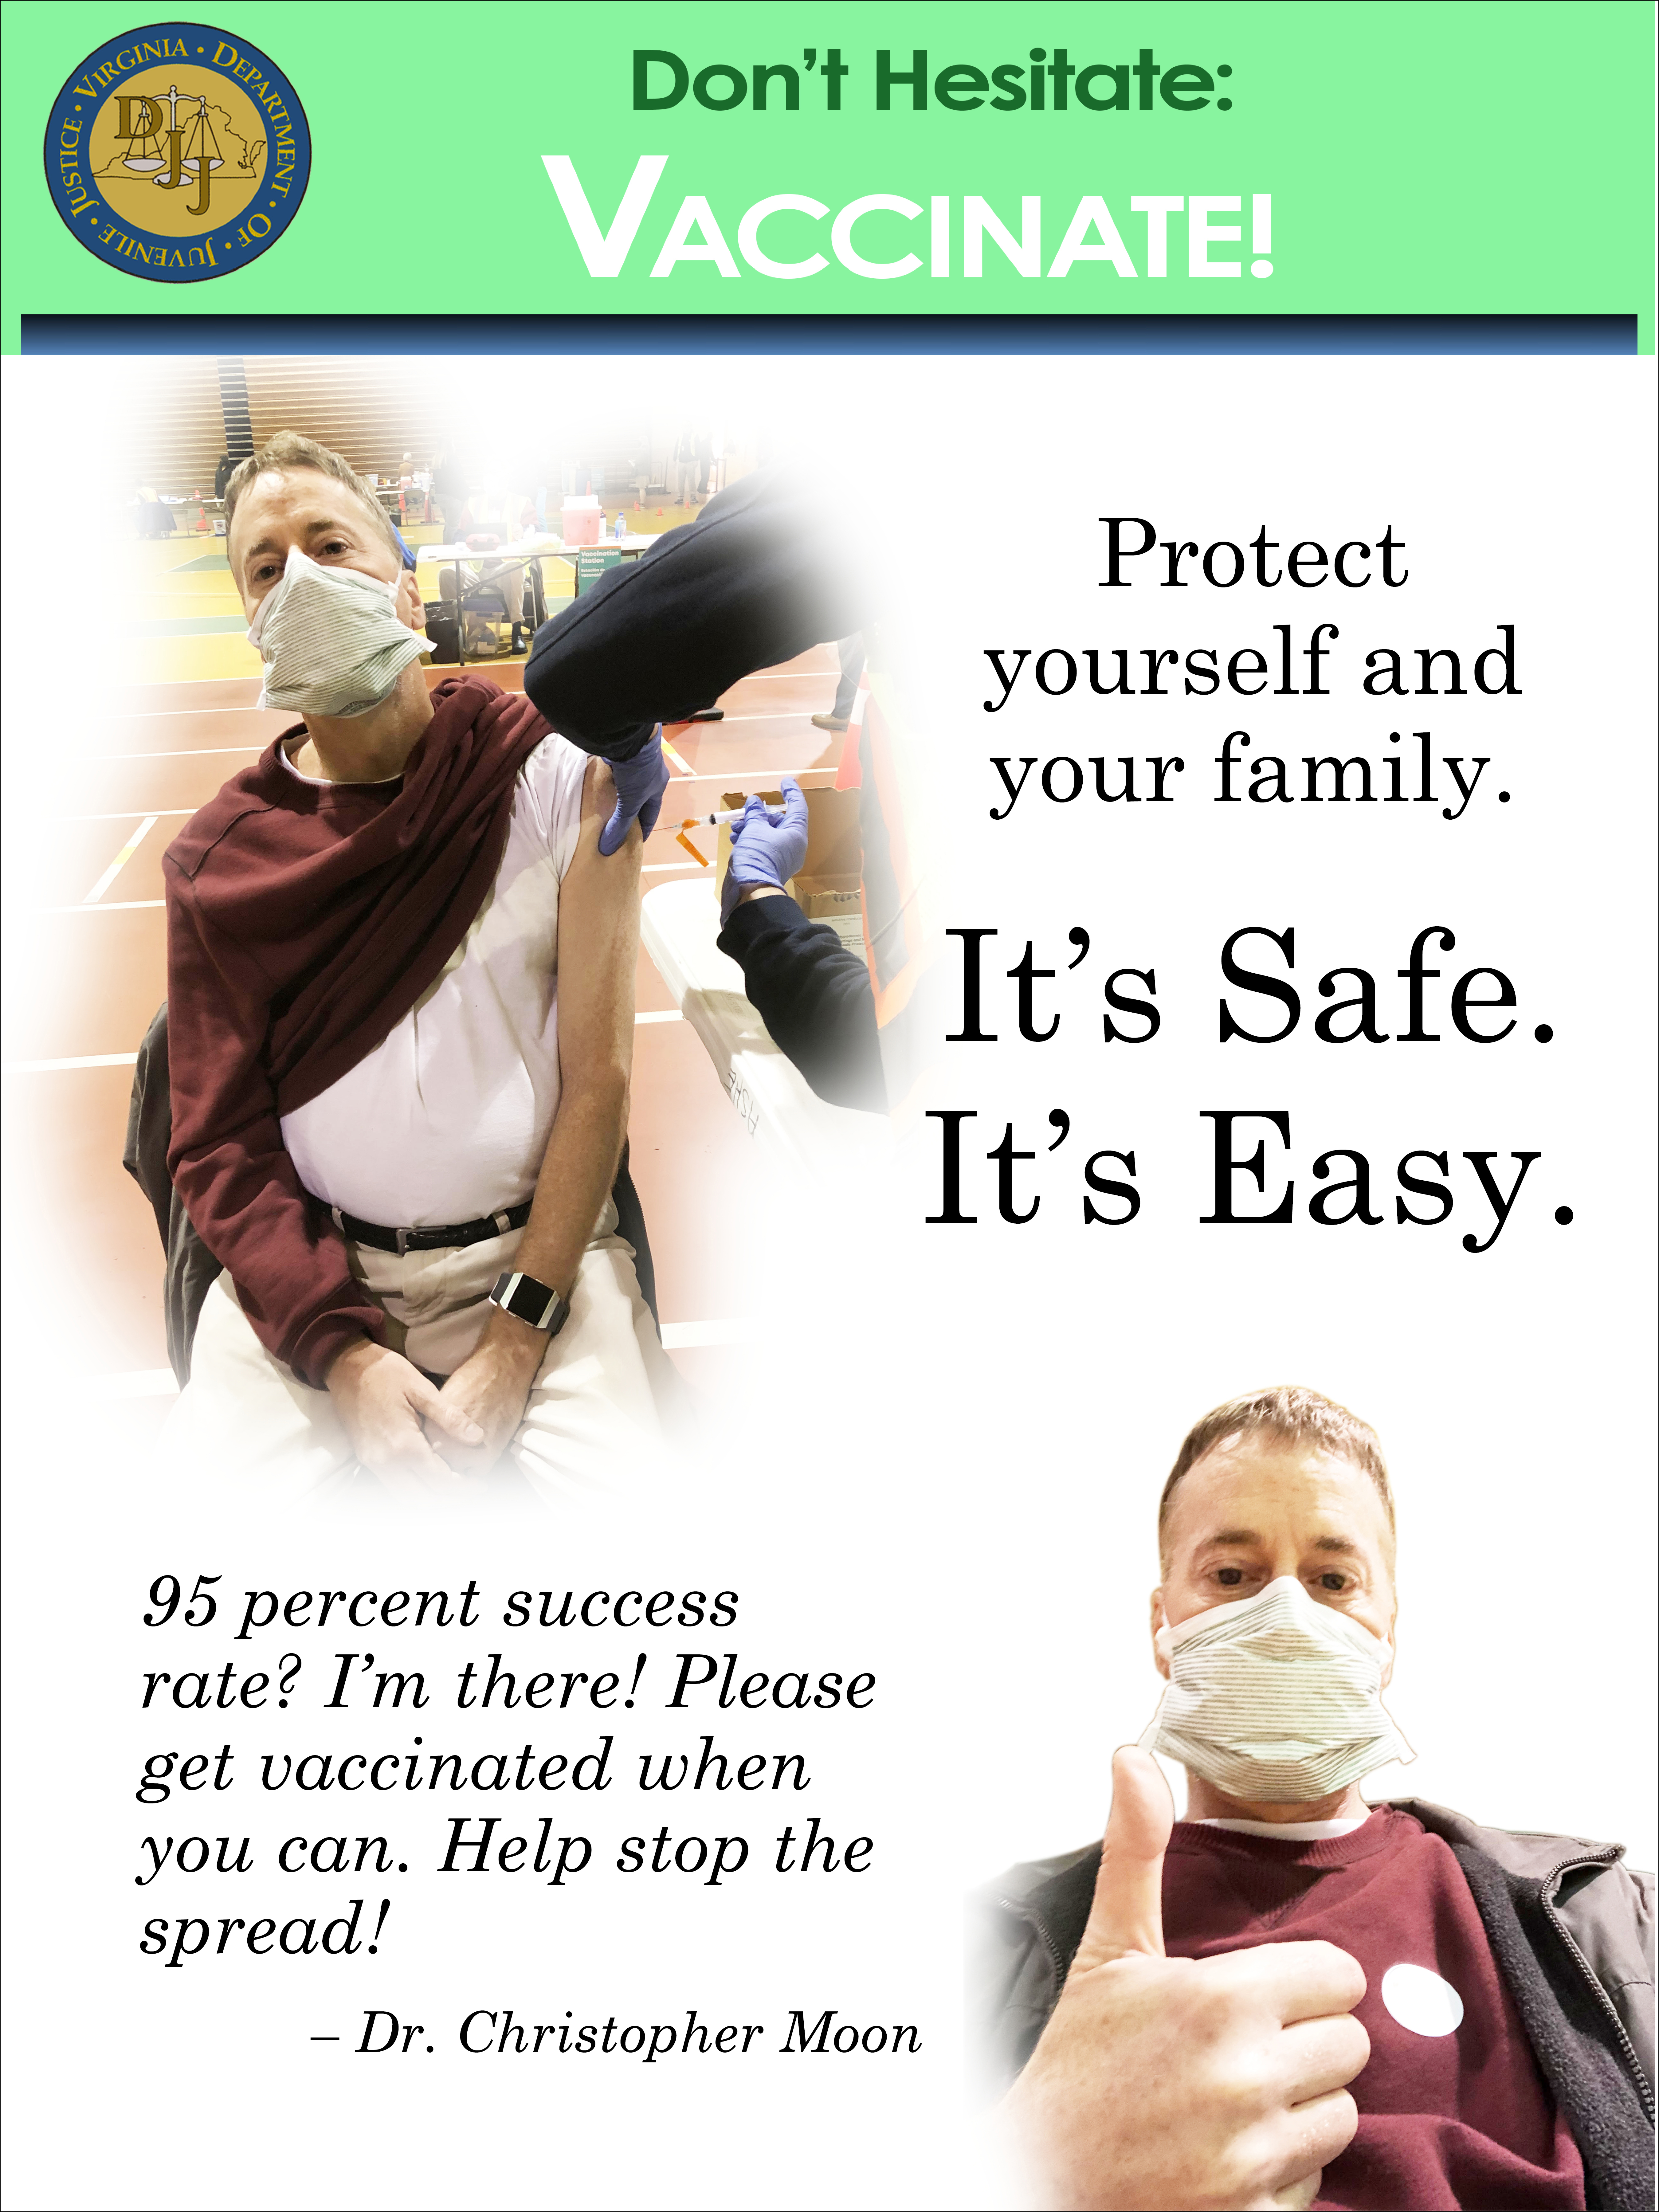 Vaccination Message poster